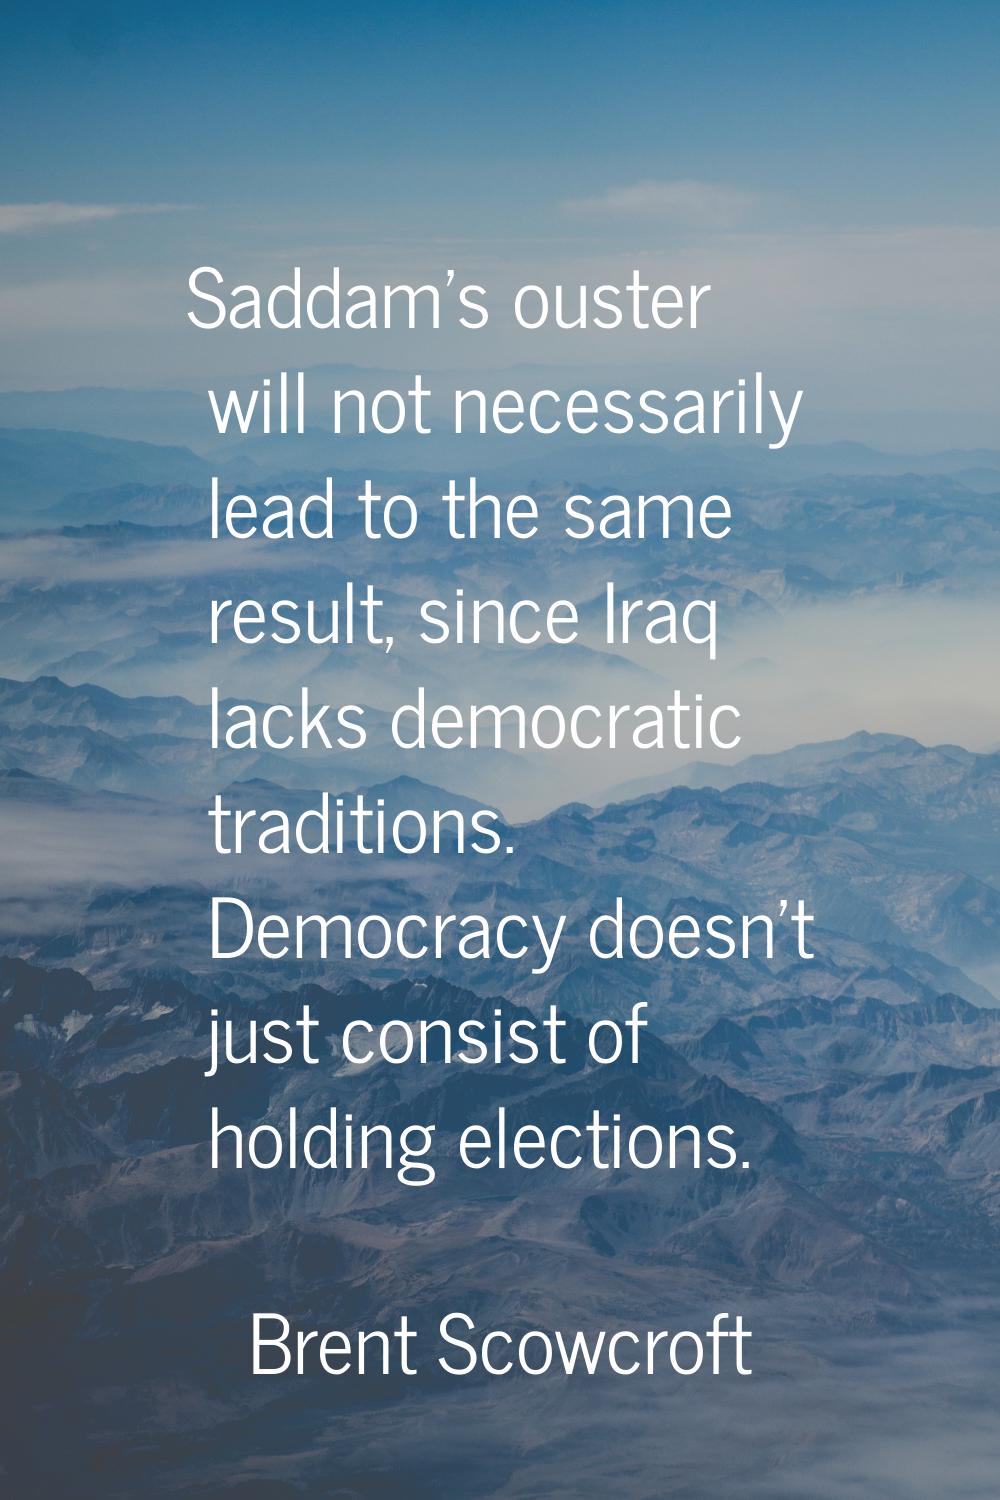 Saddam's ouster will not necessarily lead to the same result, since Iraq lacks democratic tradition